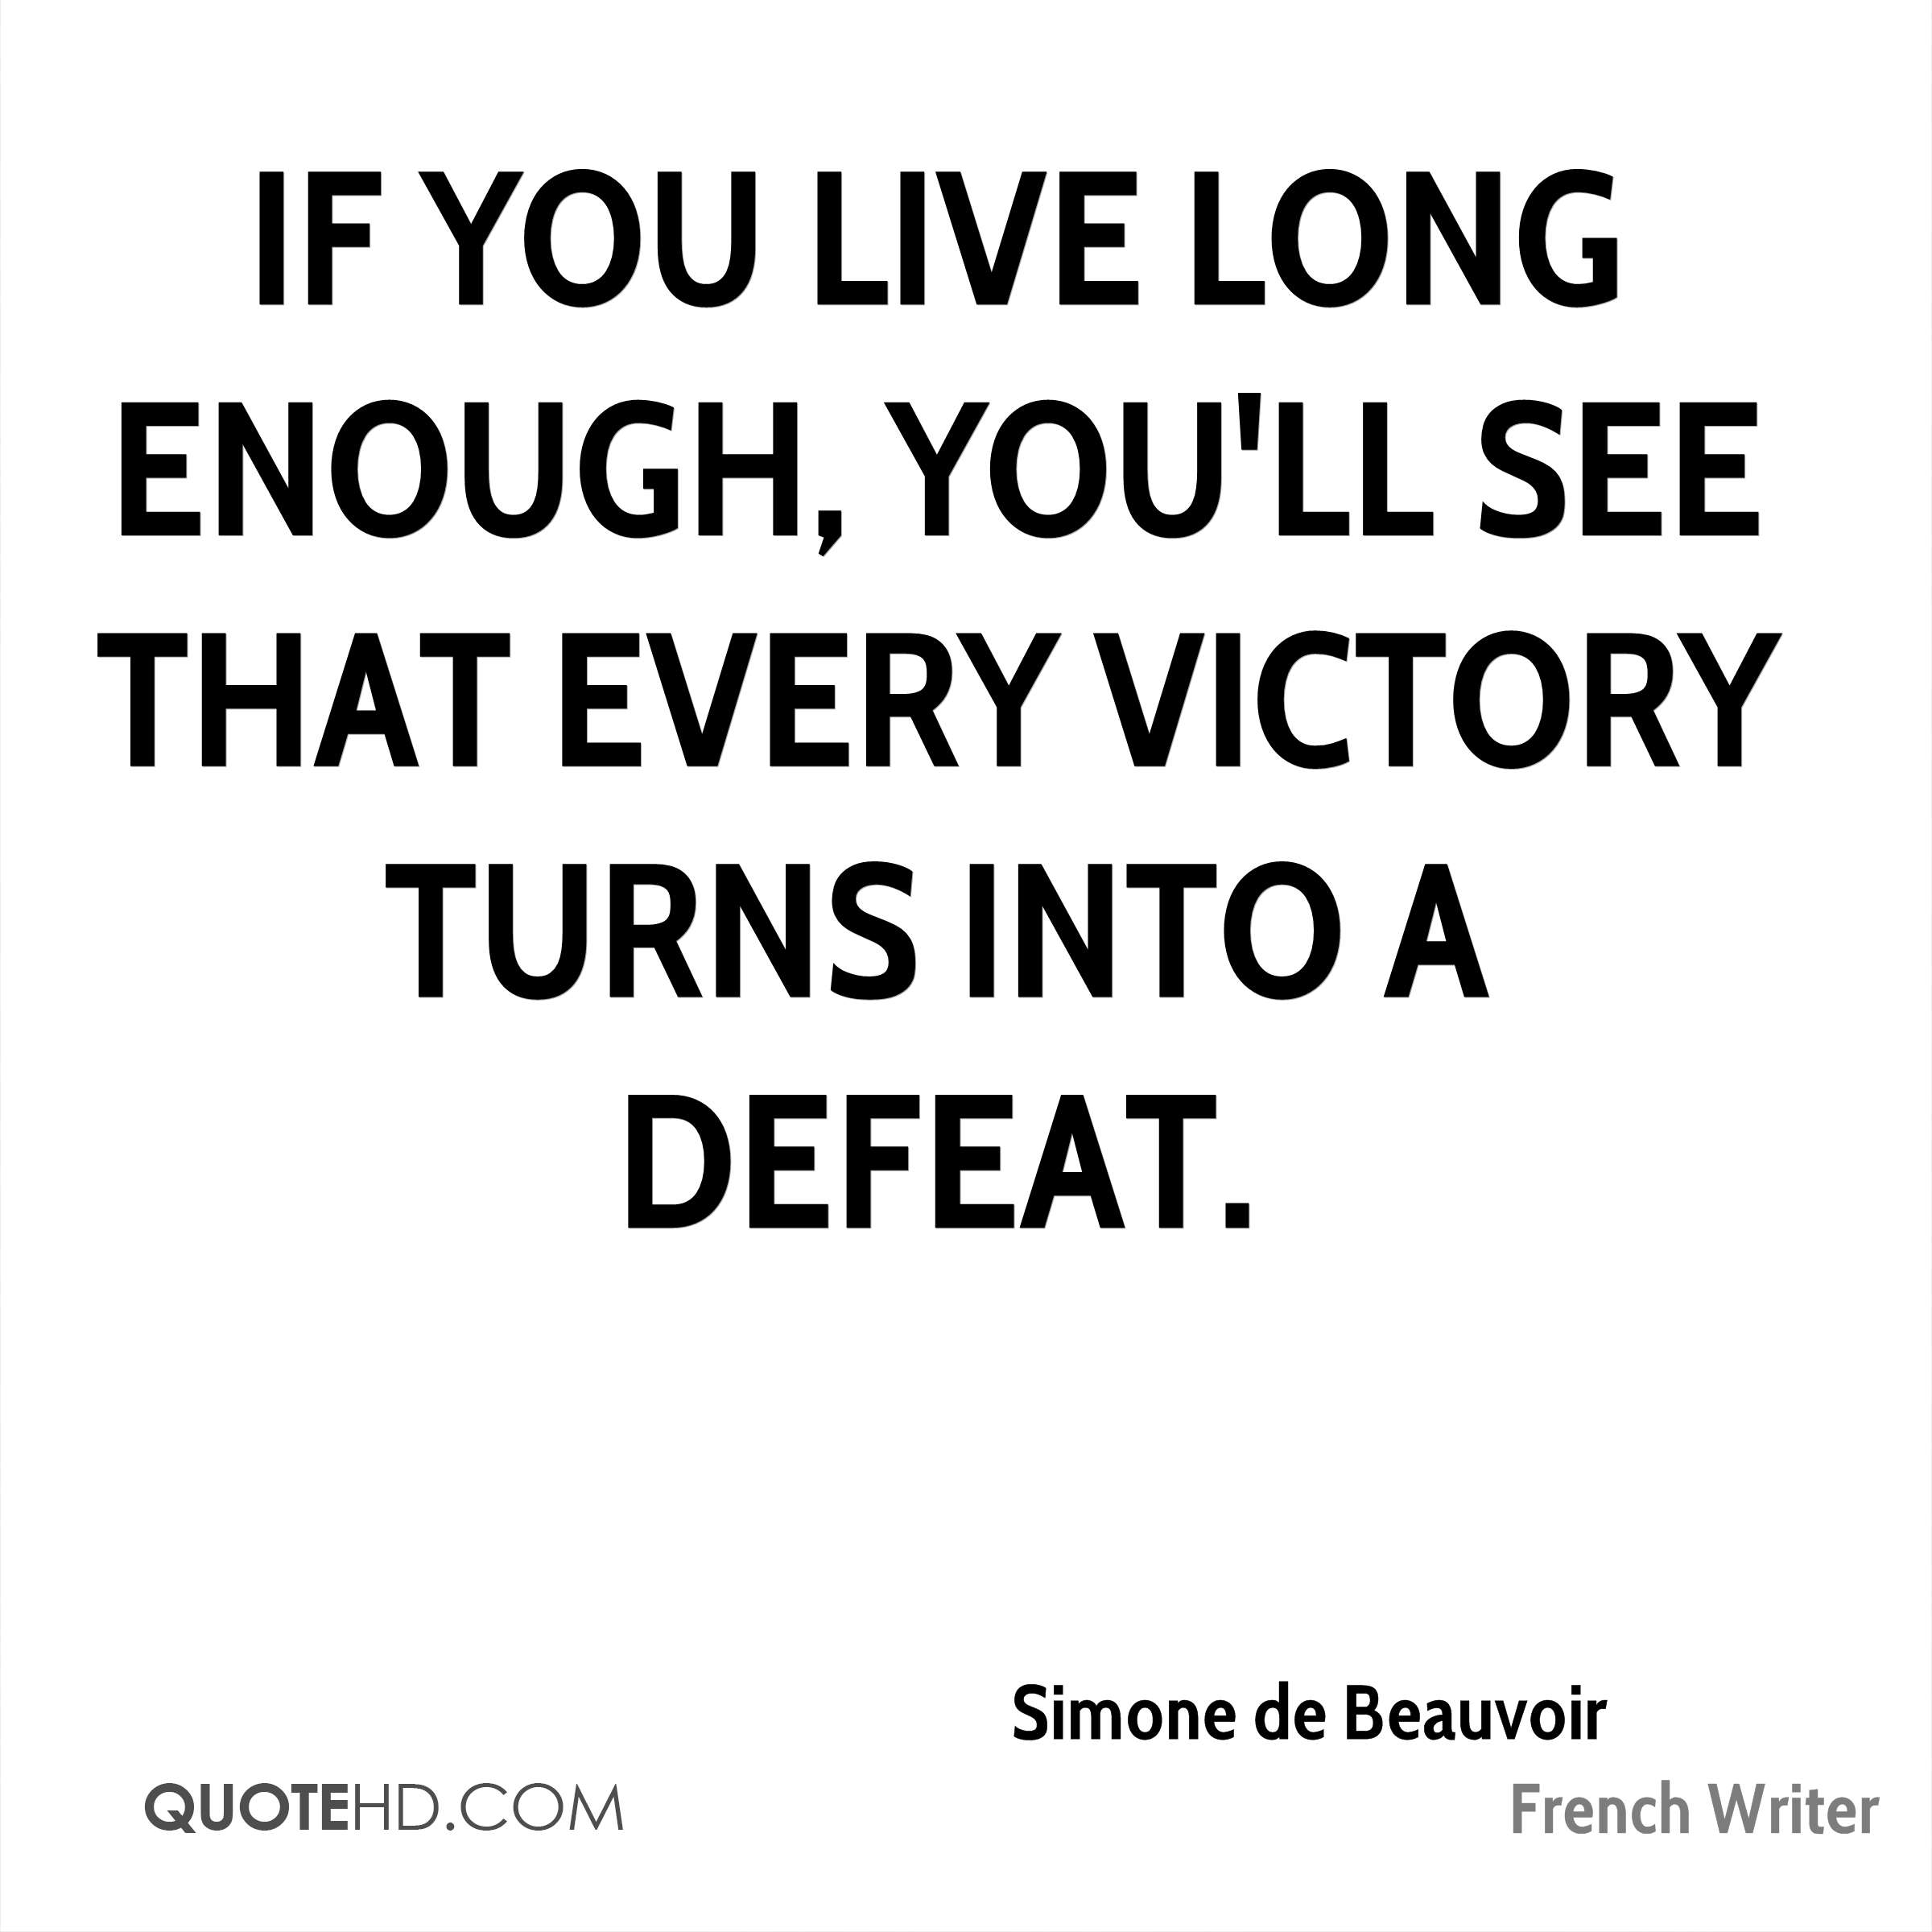 If you live long enough, you’ll see that every victory turns into a defeat. simone de beauvoir